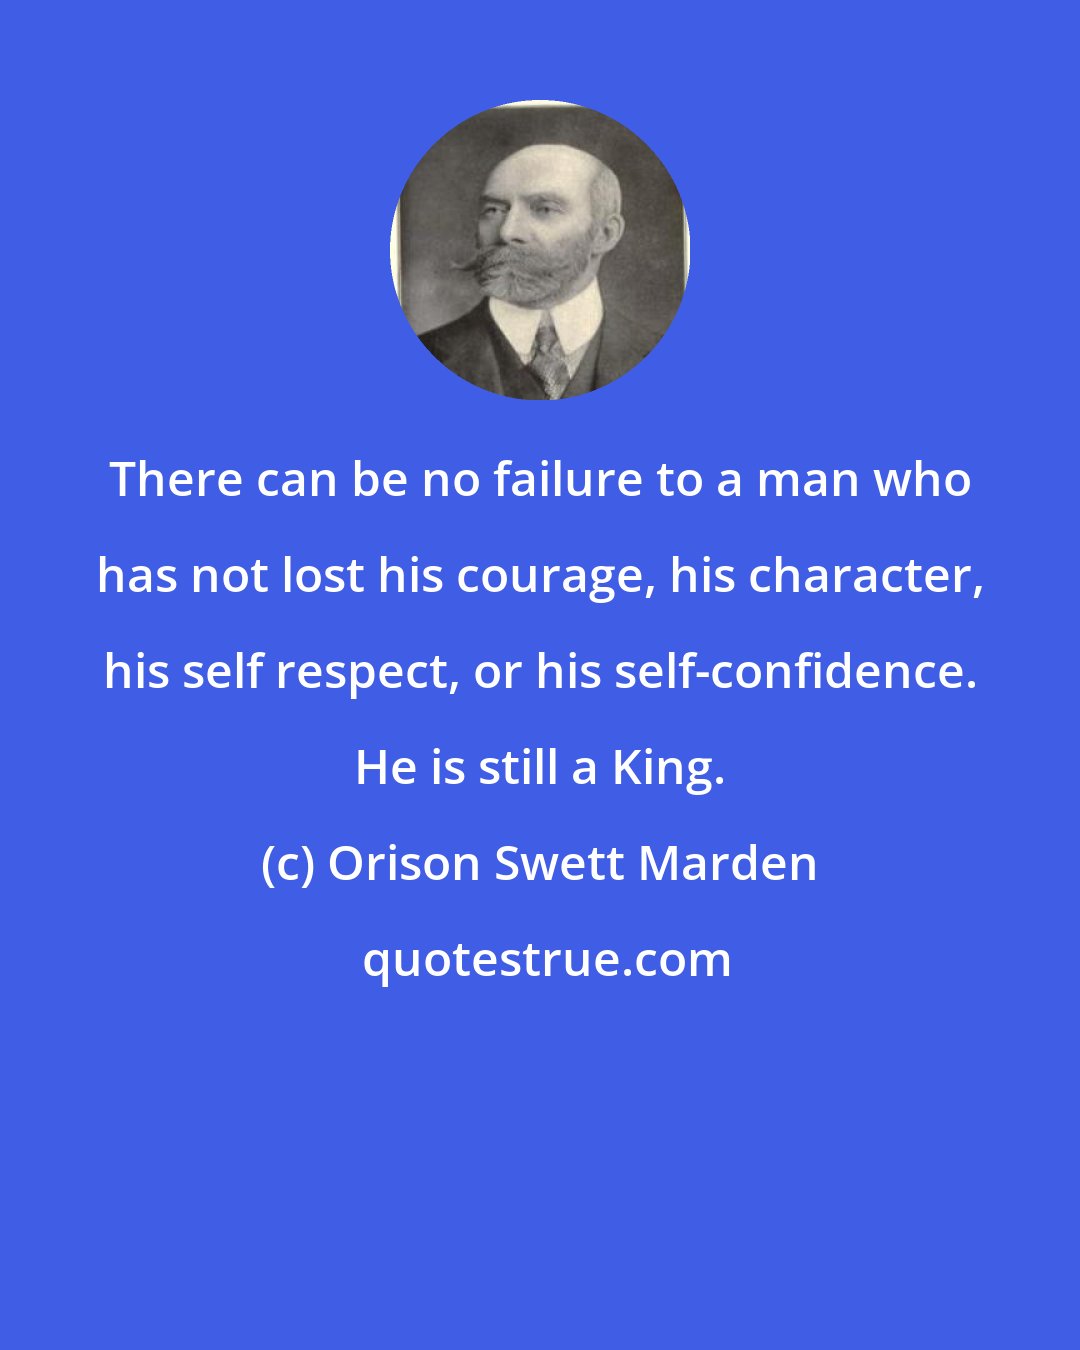 Orison Swett Marden: There can be no failure to a man who has not lost his courage, his character, his self respect, or his self-confidence. He is still a King.